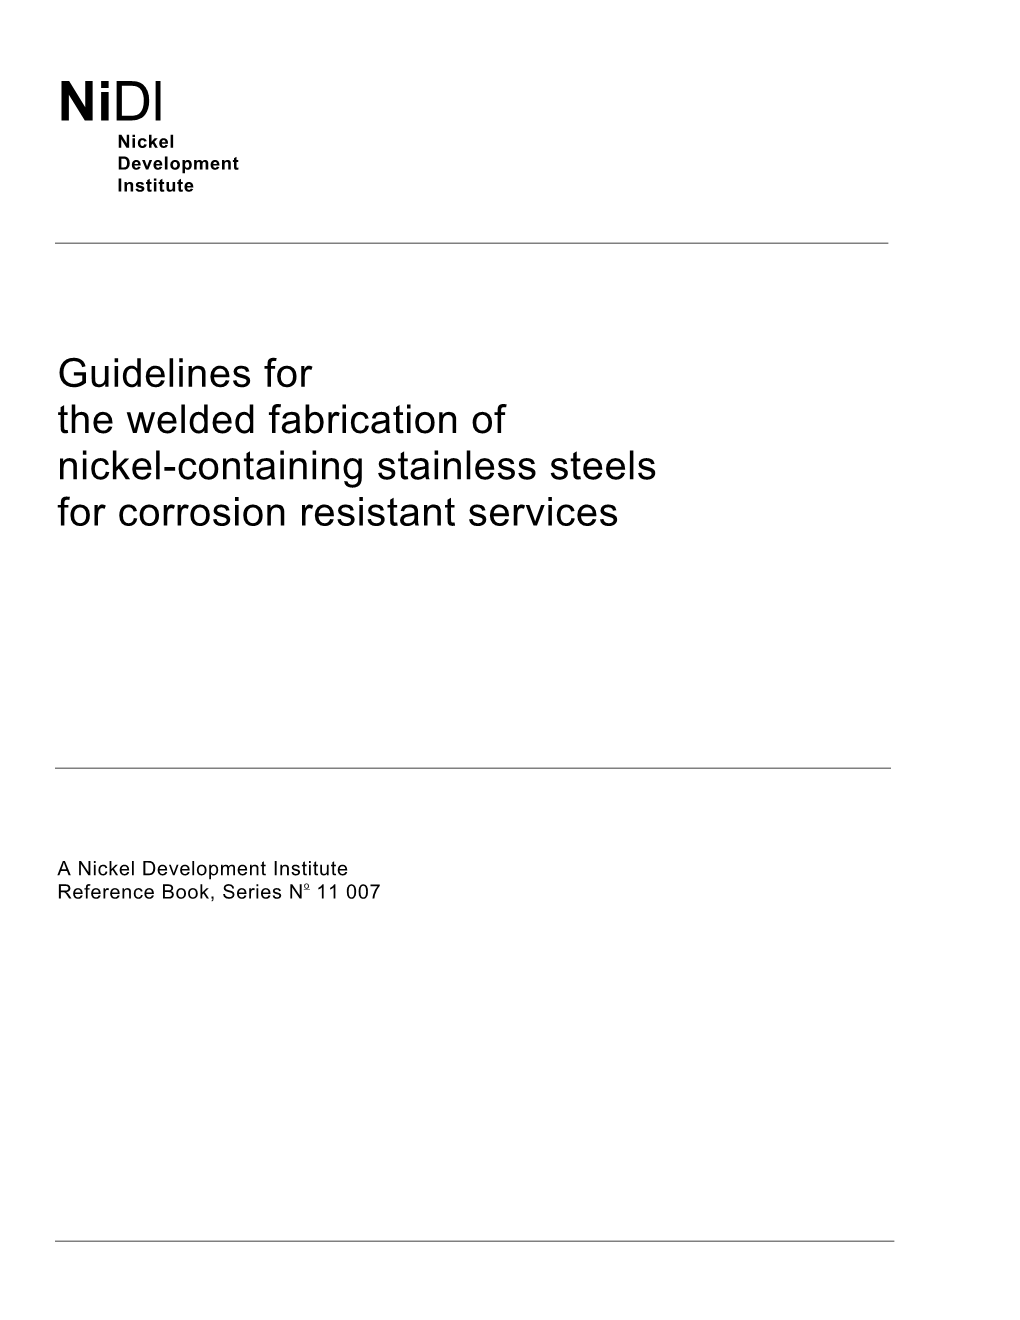 Guidelines for the Welded Fabrication of Nickel-Containing Stainless Steels for Corrosion Resistant Services